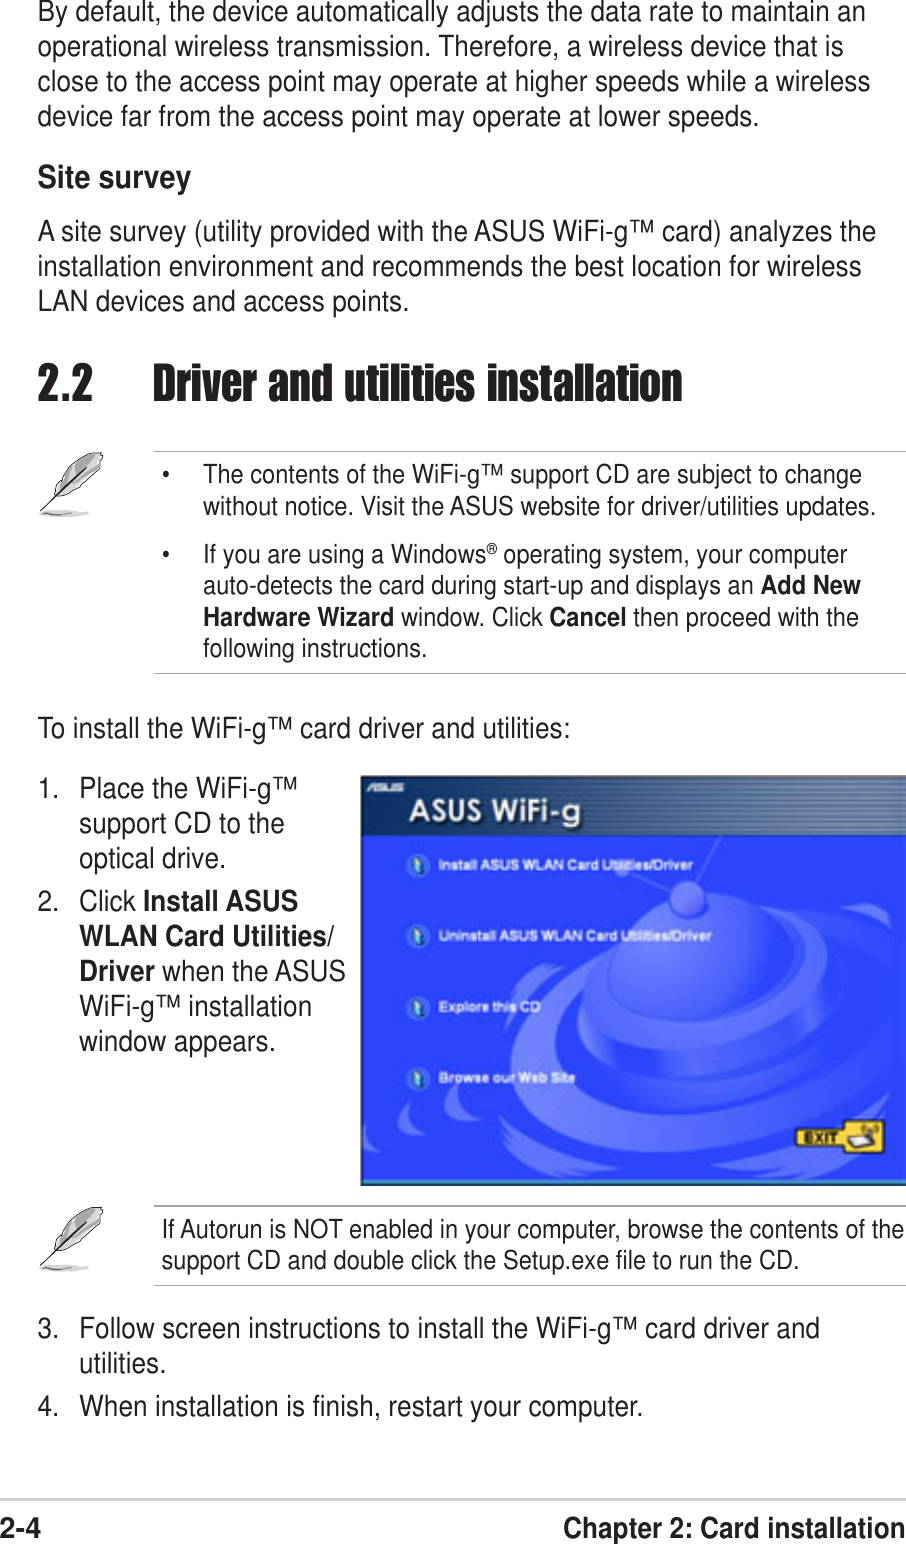 2-4Chapter 2: Card installation2.2 Driver and utilities installation• The contents of the WiFi-g™ support CD are subject to changewithout notice. Visit the ASUS website for driver/utilities updates.• If you are using a Windows® operating system, your computerauto-detects the card during start-up and displays an Add NewHardware Wizard window. Click Cancel then proceed with thefollowing instructions.To install the WiFi-g™ card driver and utilities:1. Place the WiFi-g™support CD to theoptical drive.2. Click Install ASUSWLAN Card Utilities/Driver when the ASUSWiFi-g™ installationwindow appears.If Autorun is NOT enabled in your computer, browse the contents of thesupport CD and double click the Setup.exe file to run the CD.3. Follow screen instructions to install the WiFi-g™ card driver andutilities.4. When installation is finish, restart your computer.By default, the device automatically adjusts the data rate to maintain anoperational wireless transmission. Therefore, a wireless device that isclose to the access point may operate at higher speeds while a wirelessdevice far from the access point may operate at lower speeds.Site surveyA site survey (utility provided with the ASUS WiFi-g™ card) analyzes theinstallation environment and recommends the best location for wirelessLAN devices and access points.